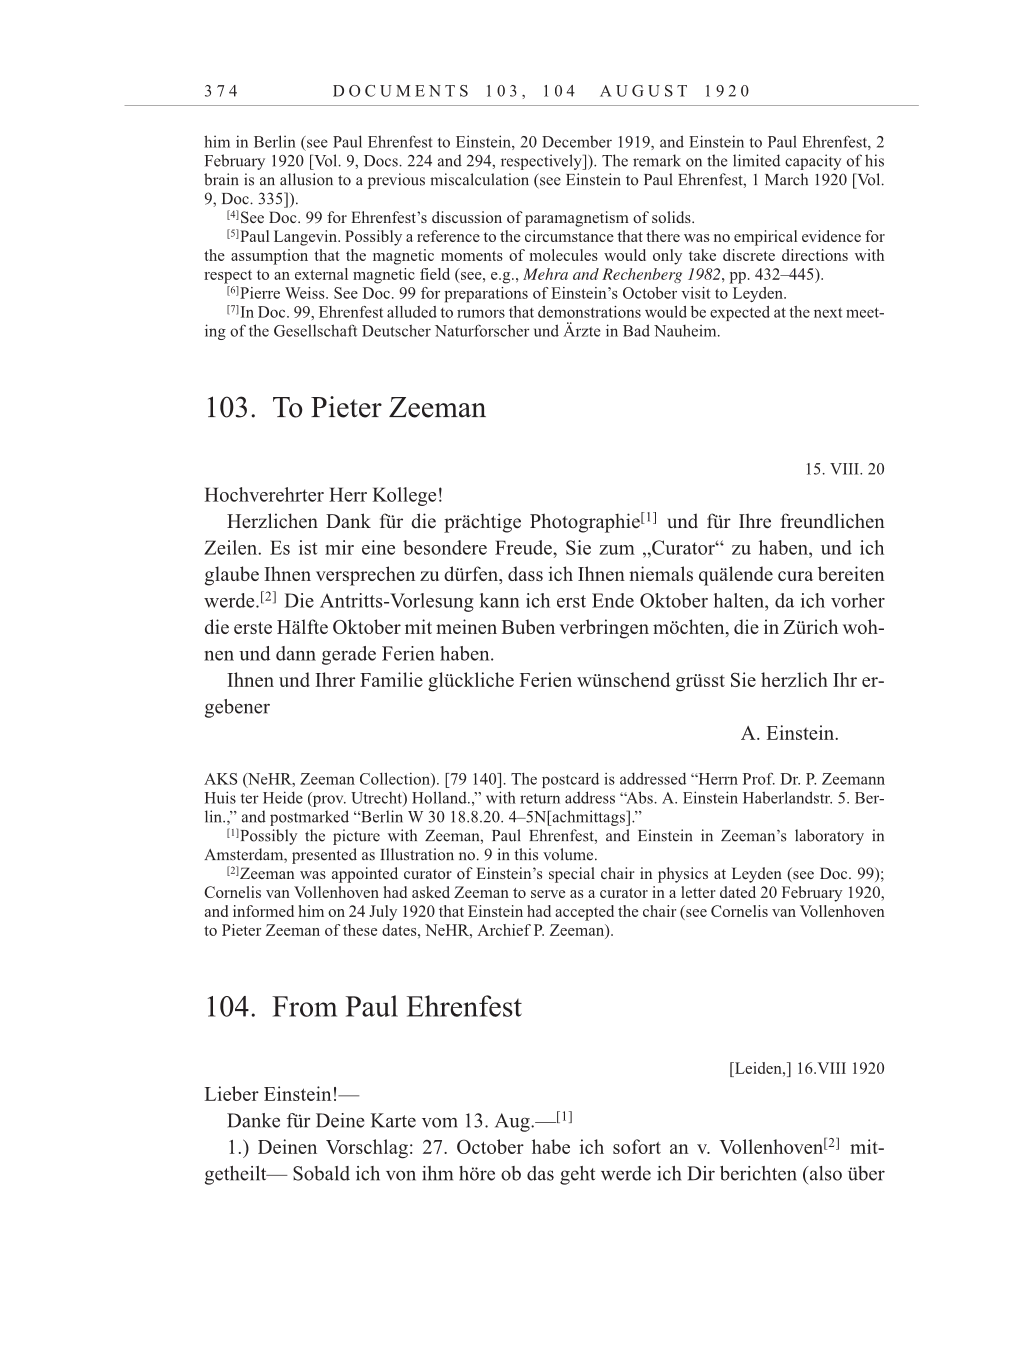 Volume 10: The Berlin Years: Correspondence May-December 1920 / Supplementary Correspondence 1909-1920 page 374